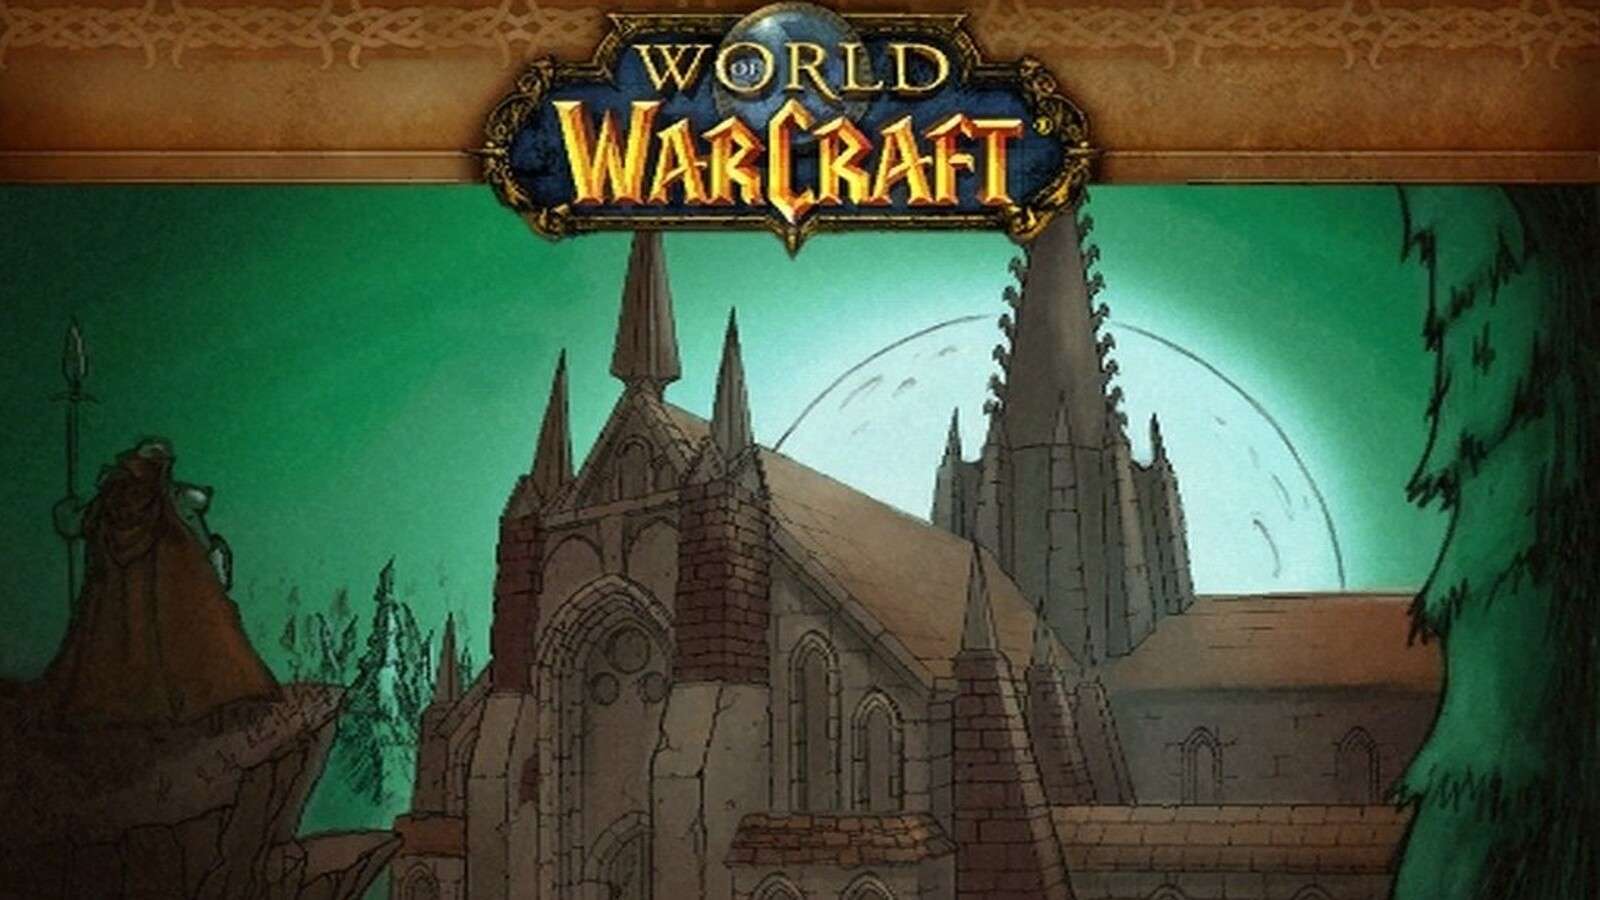 The Scarlet Monastery splash art from the loading screen in WoW Season of Discovery